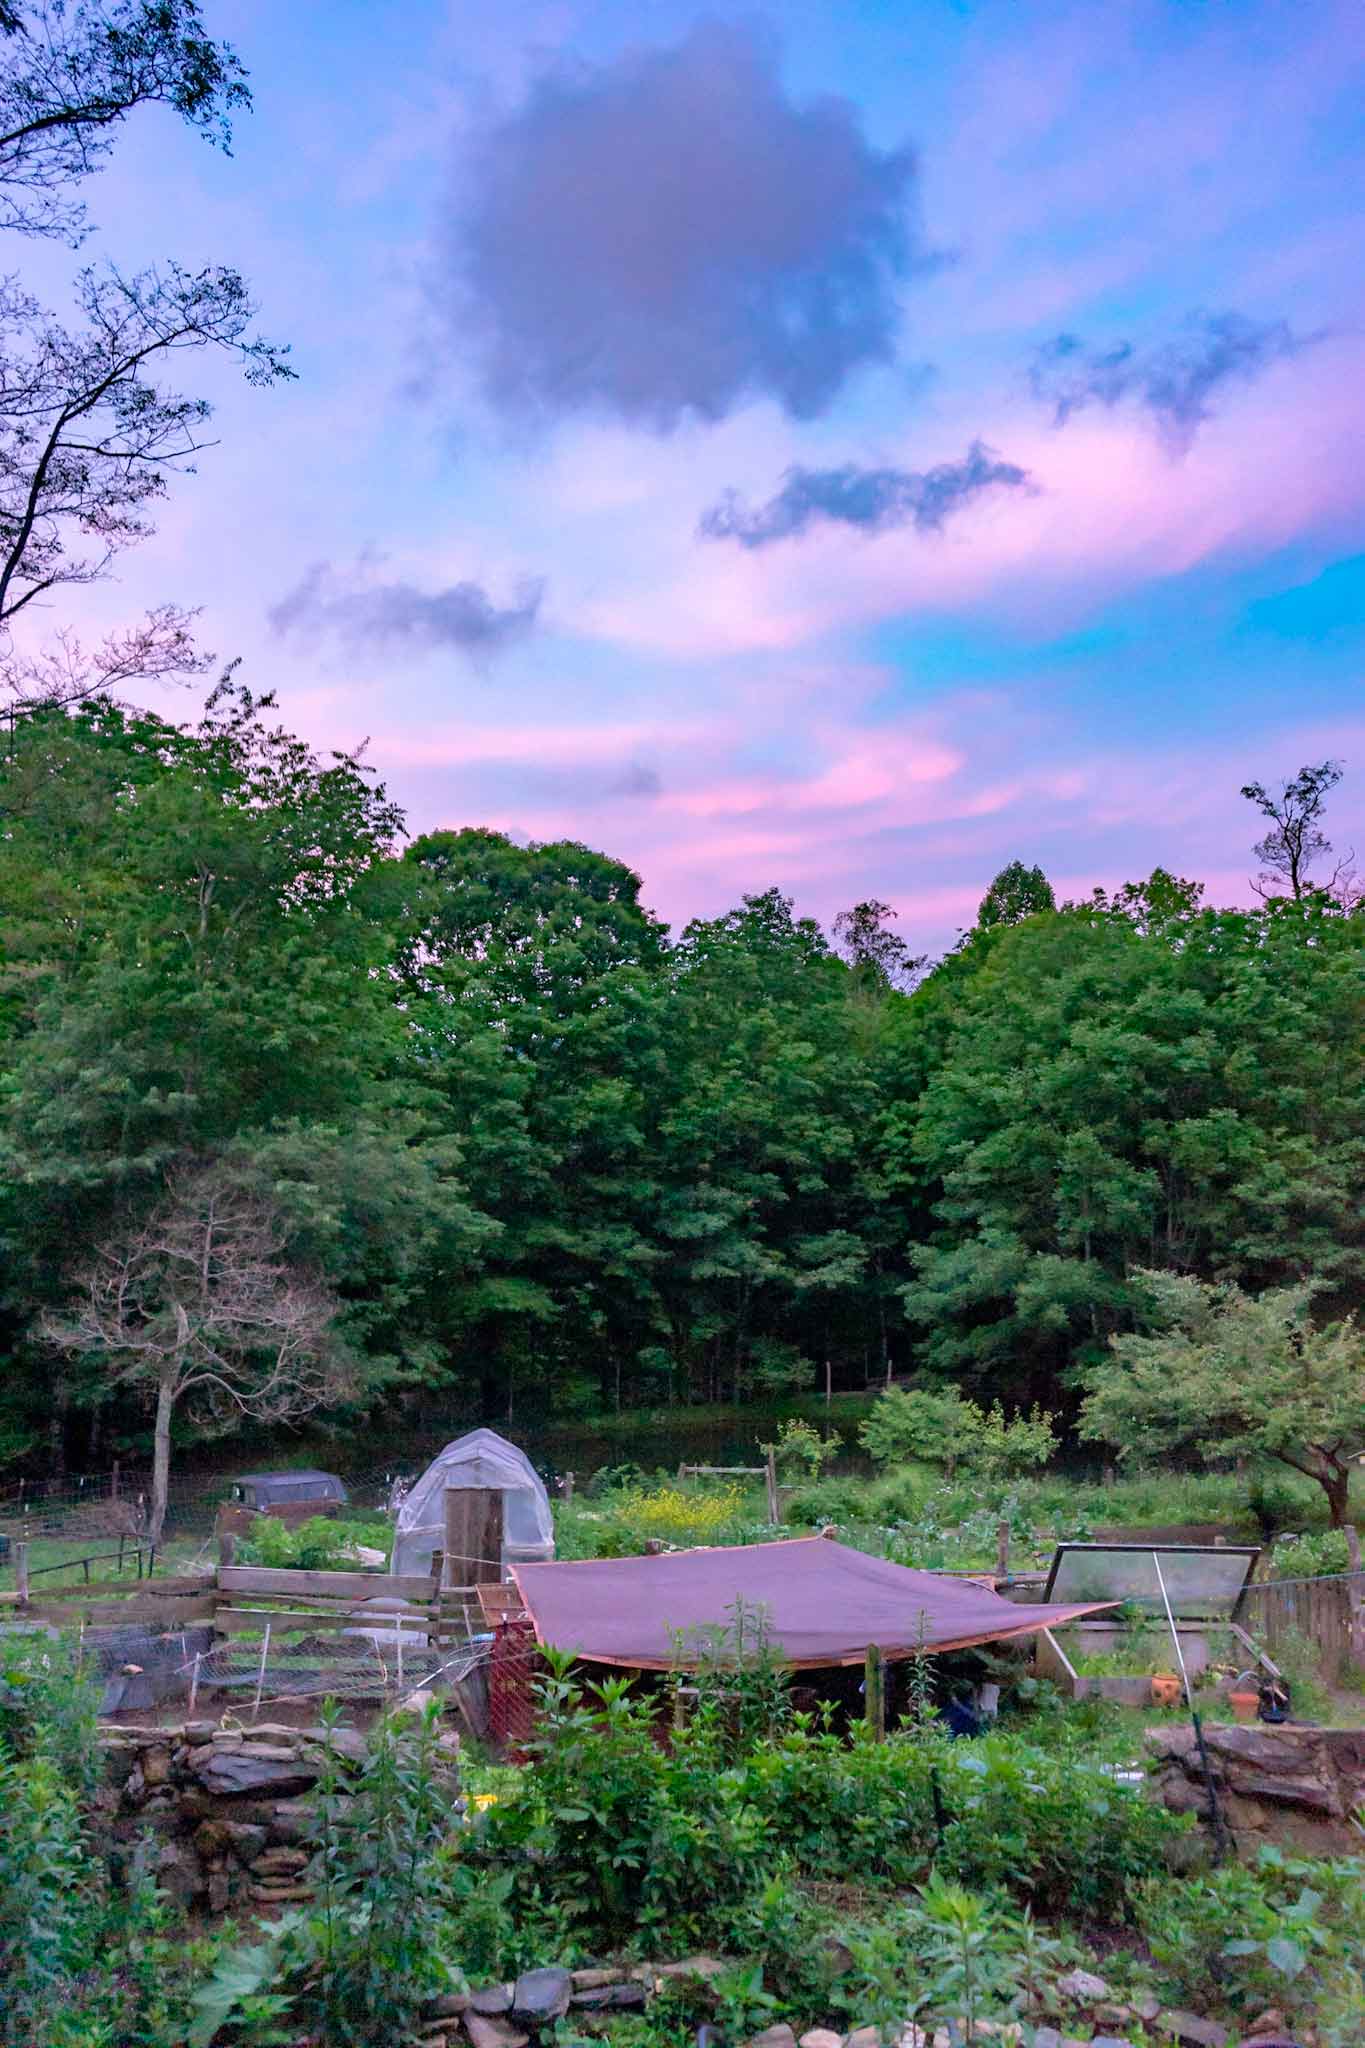 pink-blue clouds above the farm's beds and greenhouse